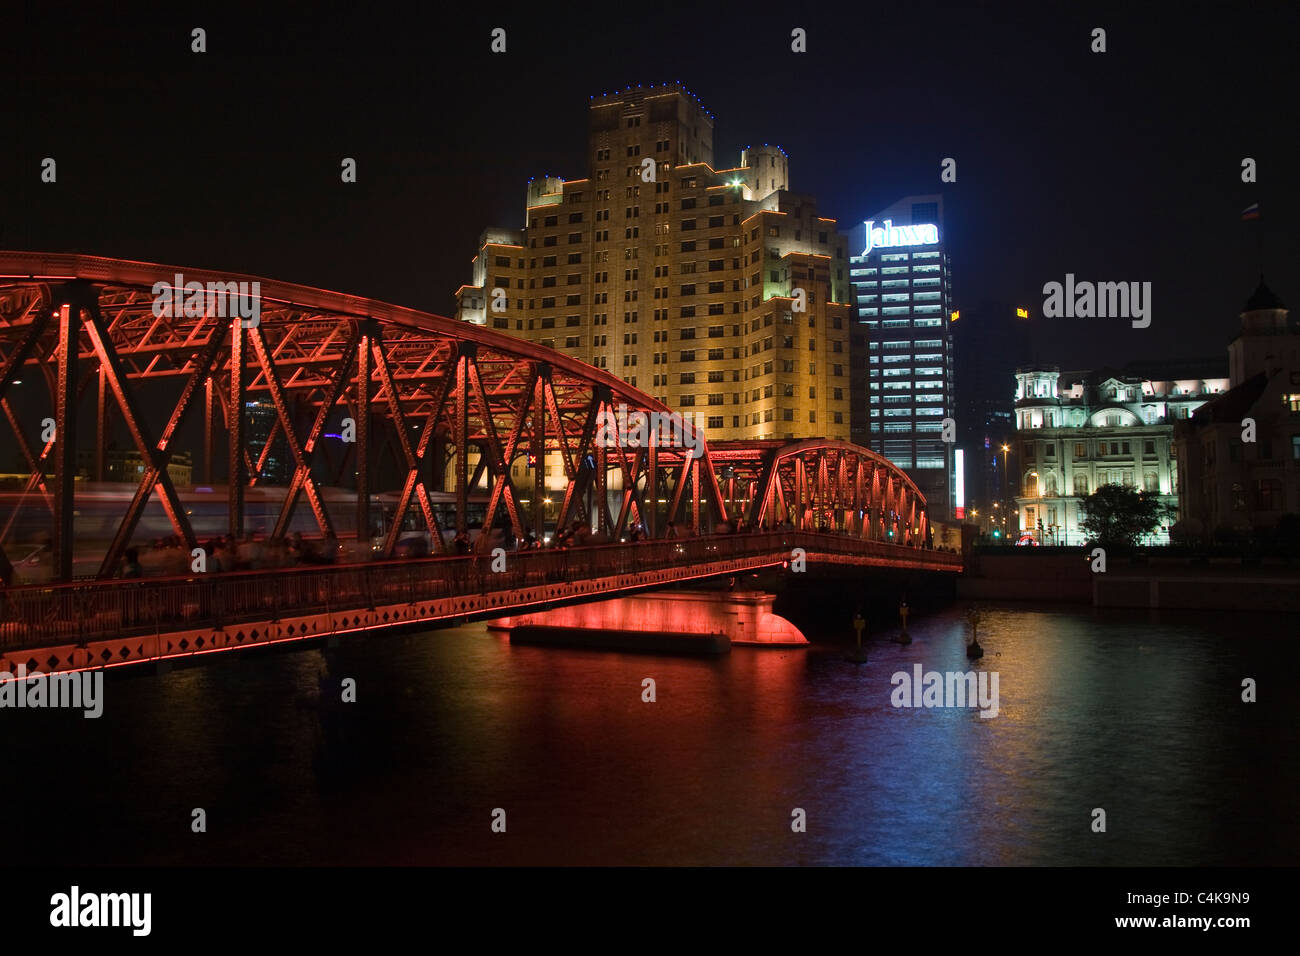 The antique structure of the Garden Bridge spanning over Suzhou Creek, Shanghai, China. Stock Photo